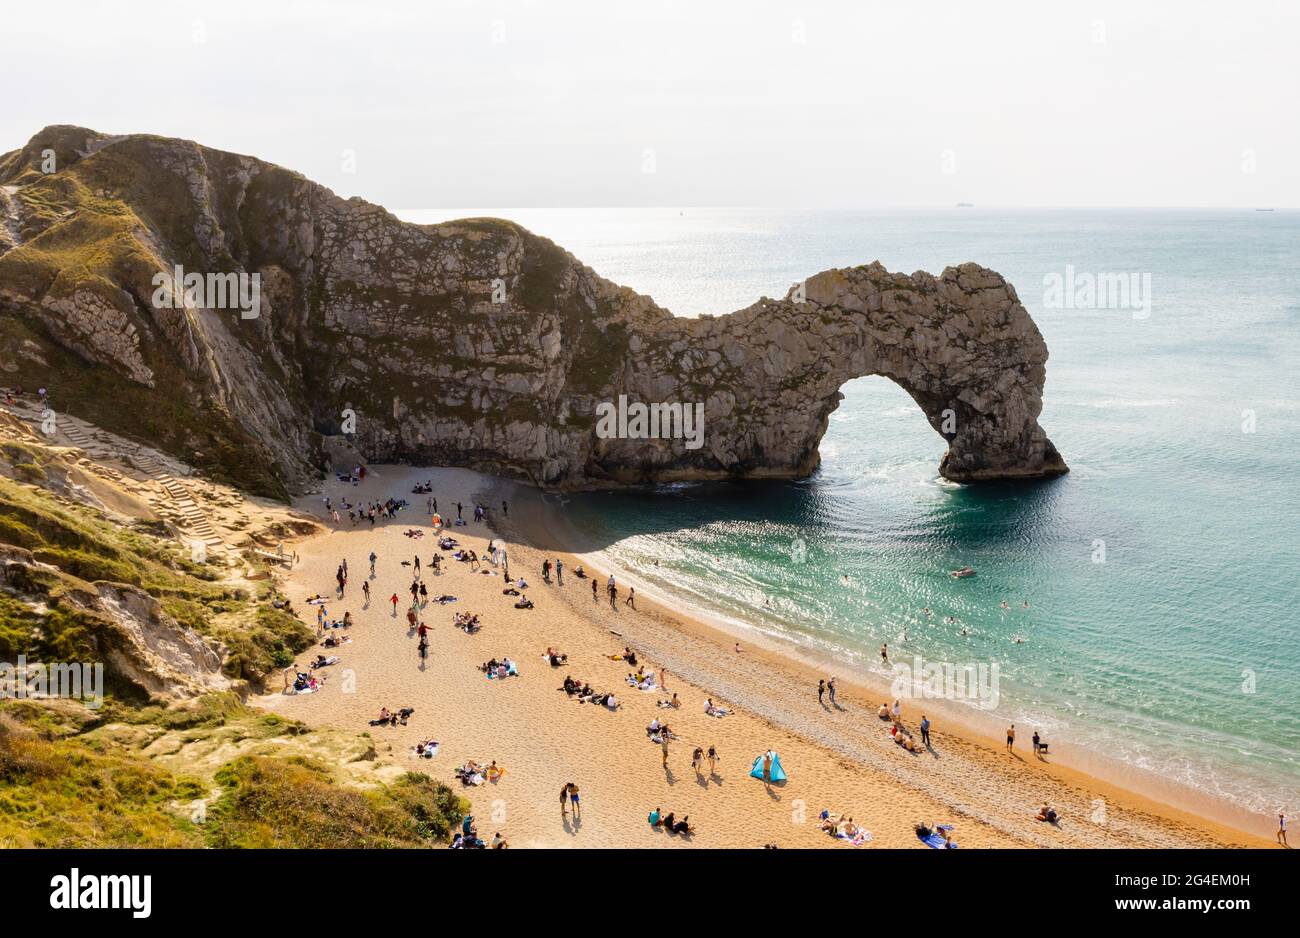 Panoramic coastal clifftop view of picturesque Durdle Door rock formation on the Jurassic Coast World Heritage site in Dorset, south-west England Stock Photo